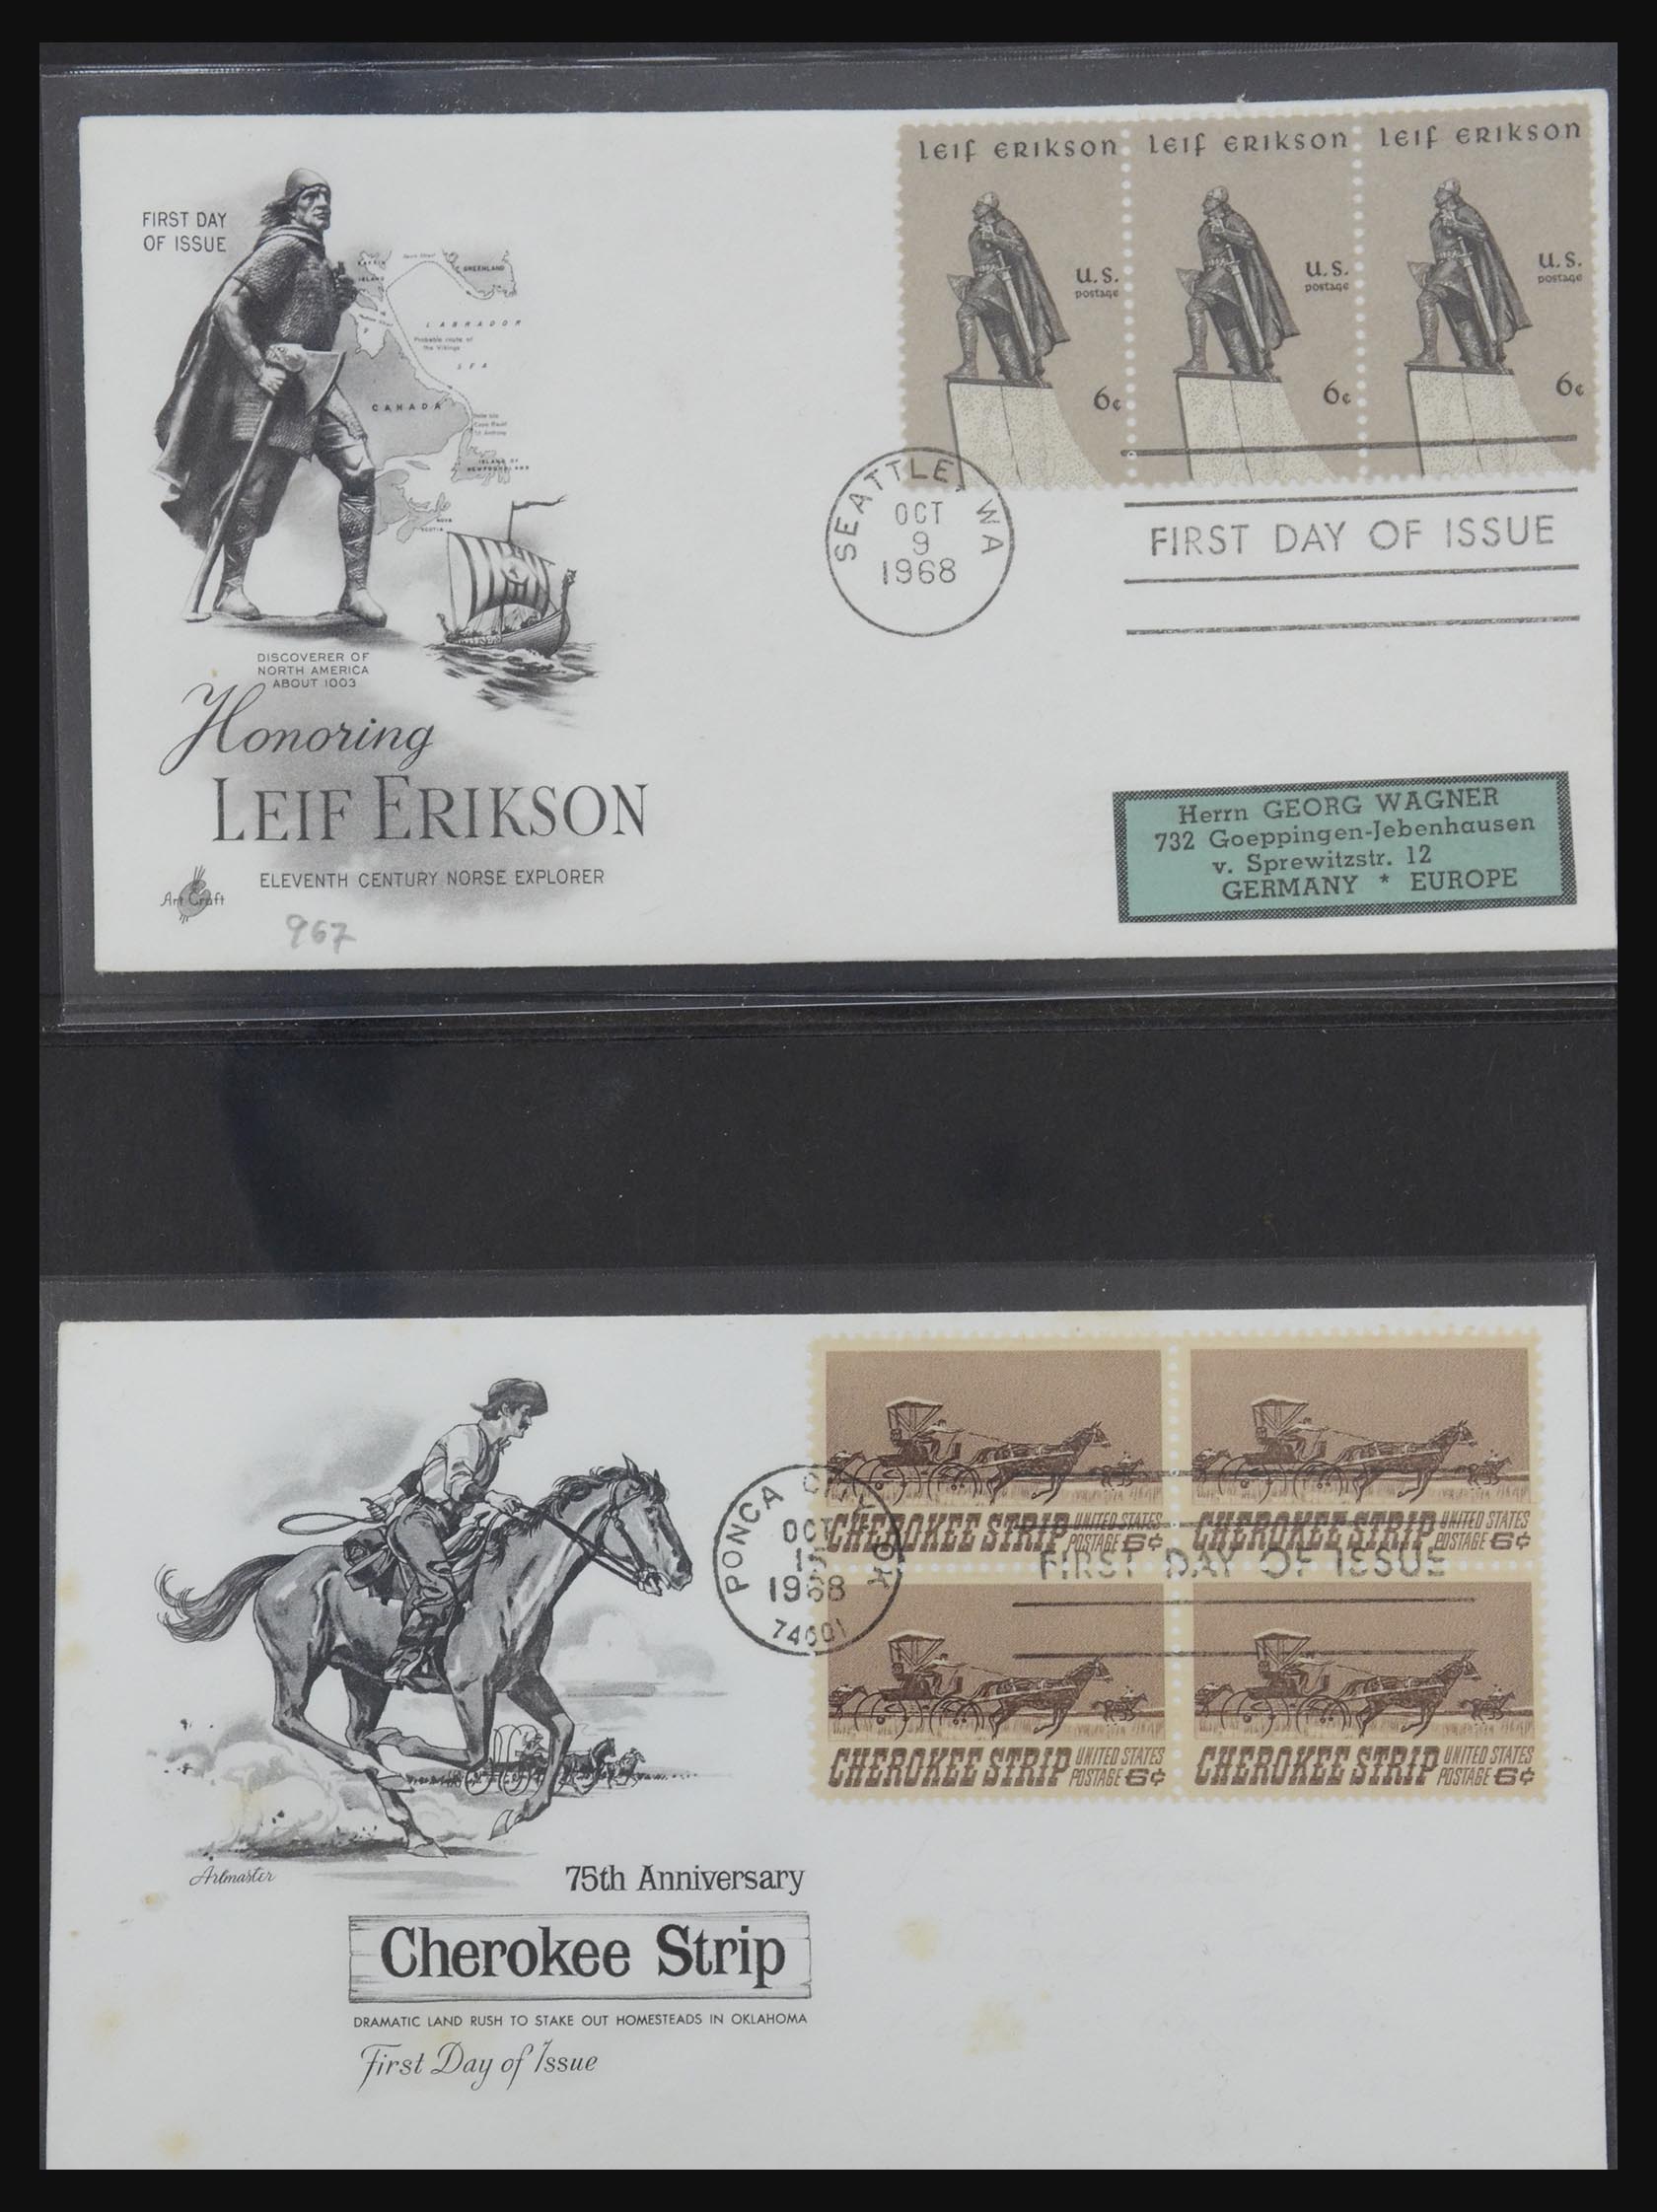 31913 0066 - 31913 USA fdc-collectie 1945-1990.